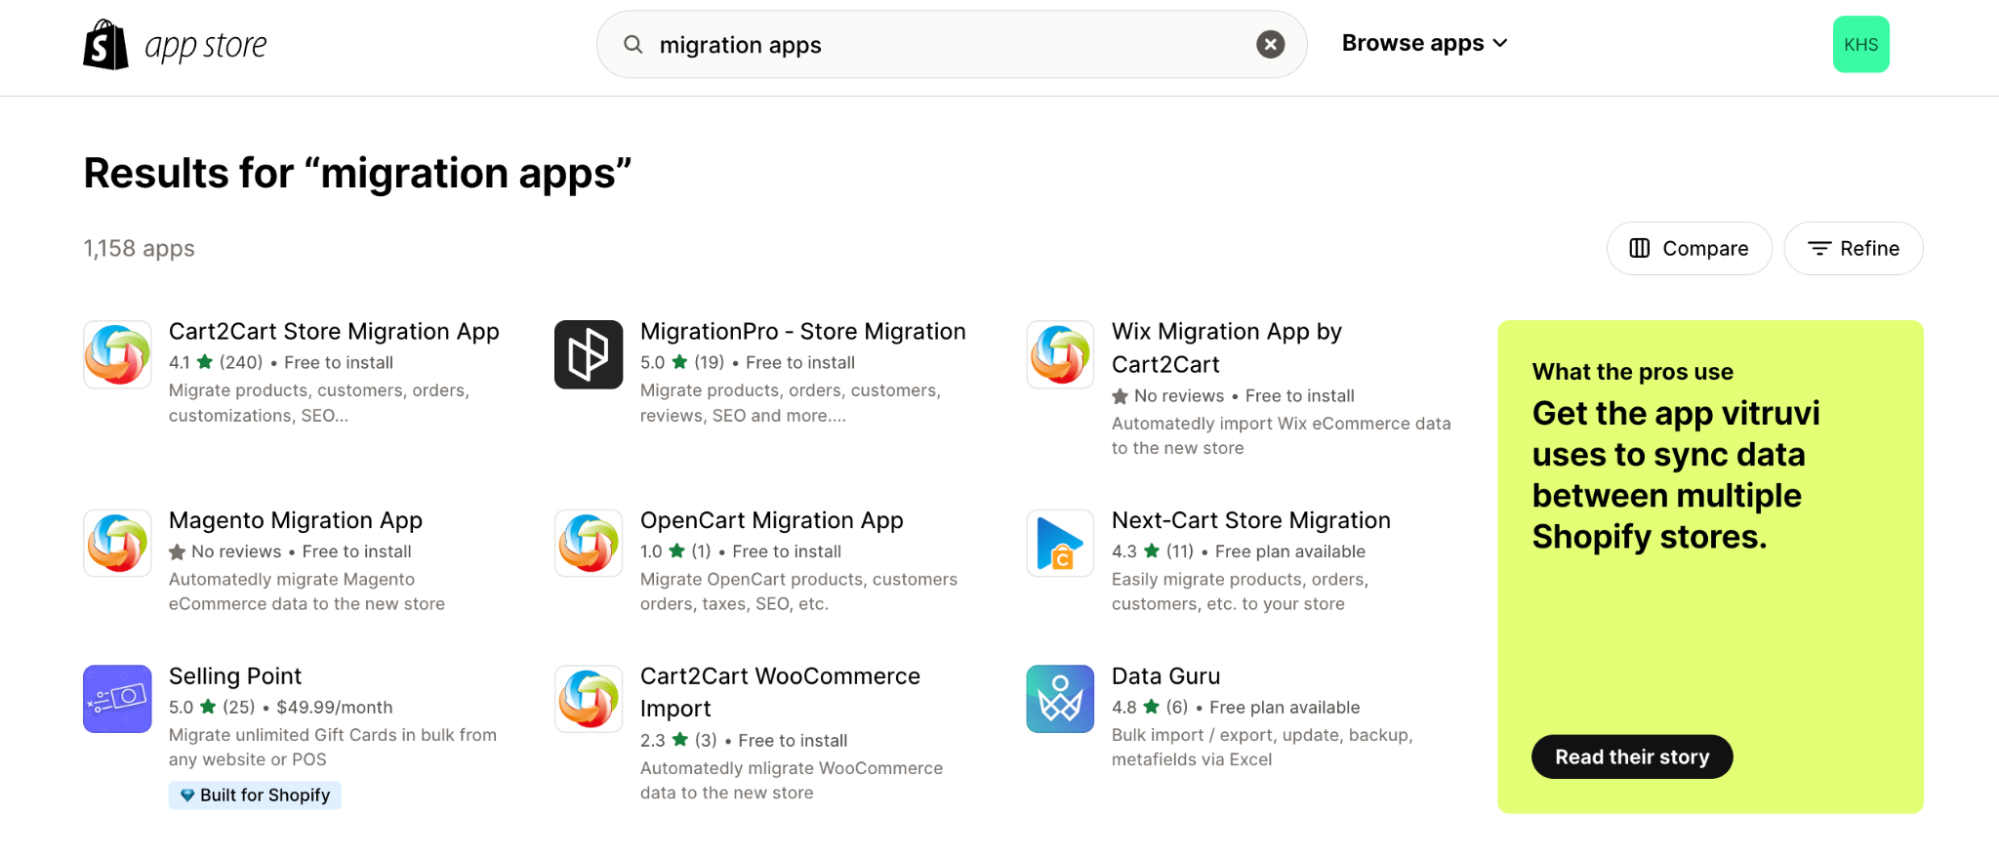 image of the shopify app store with migration apps